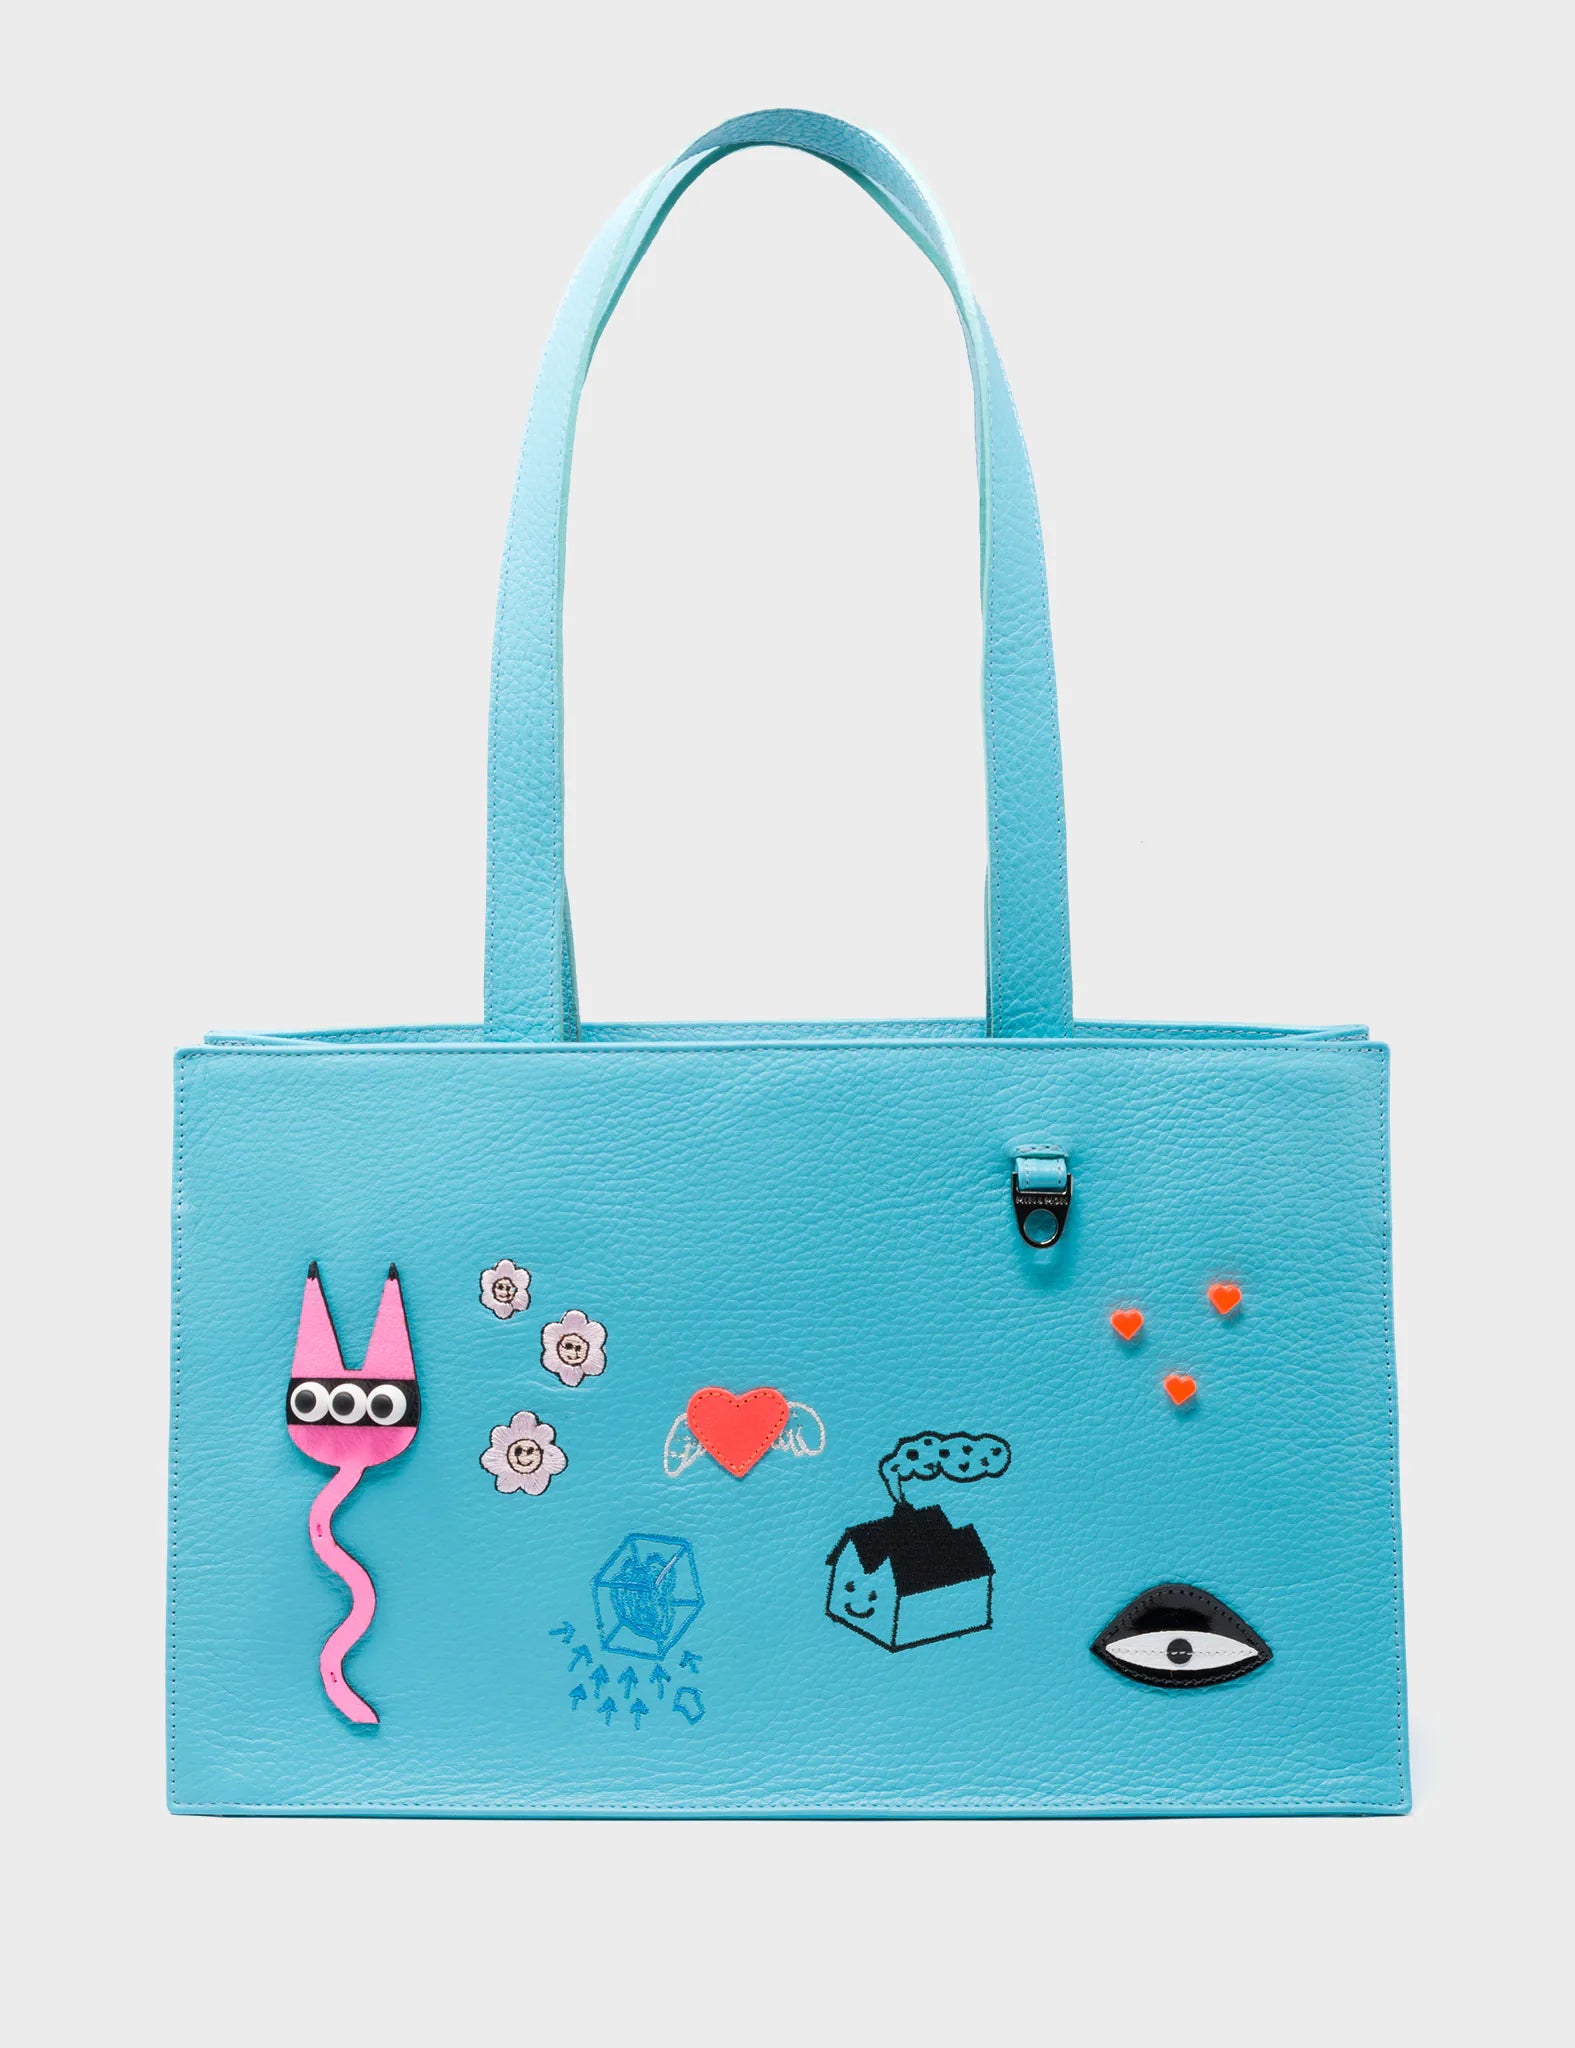 Marko Small Cyan Leather Tote Bag - Urban Doodles Applique - Front view